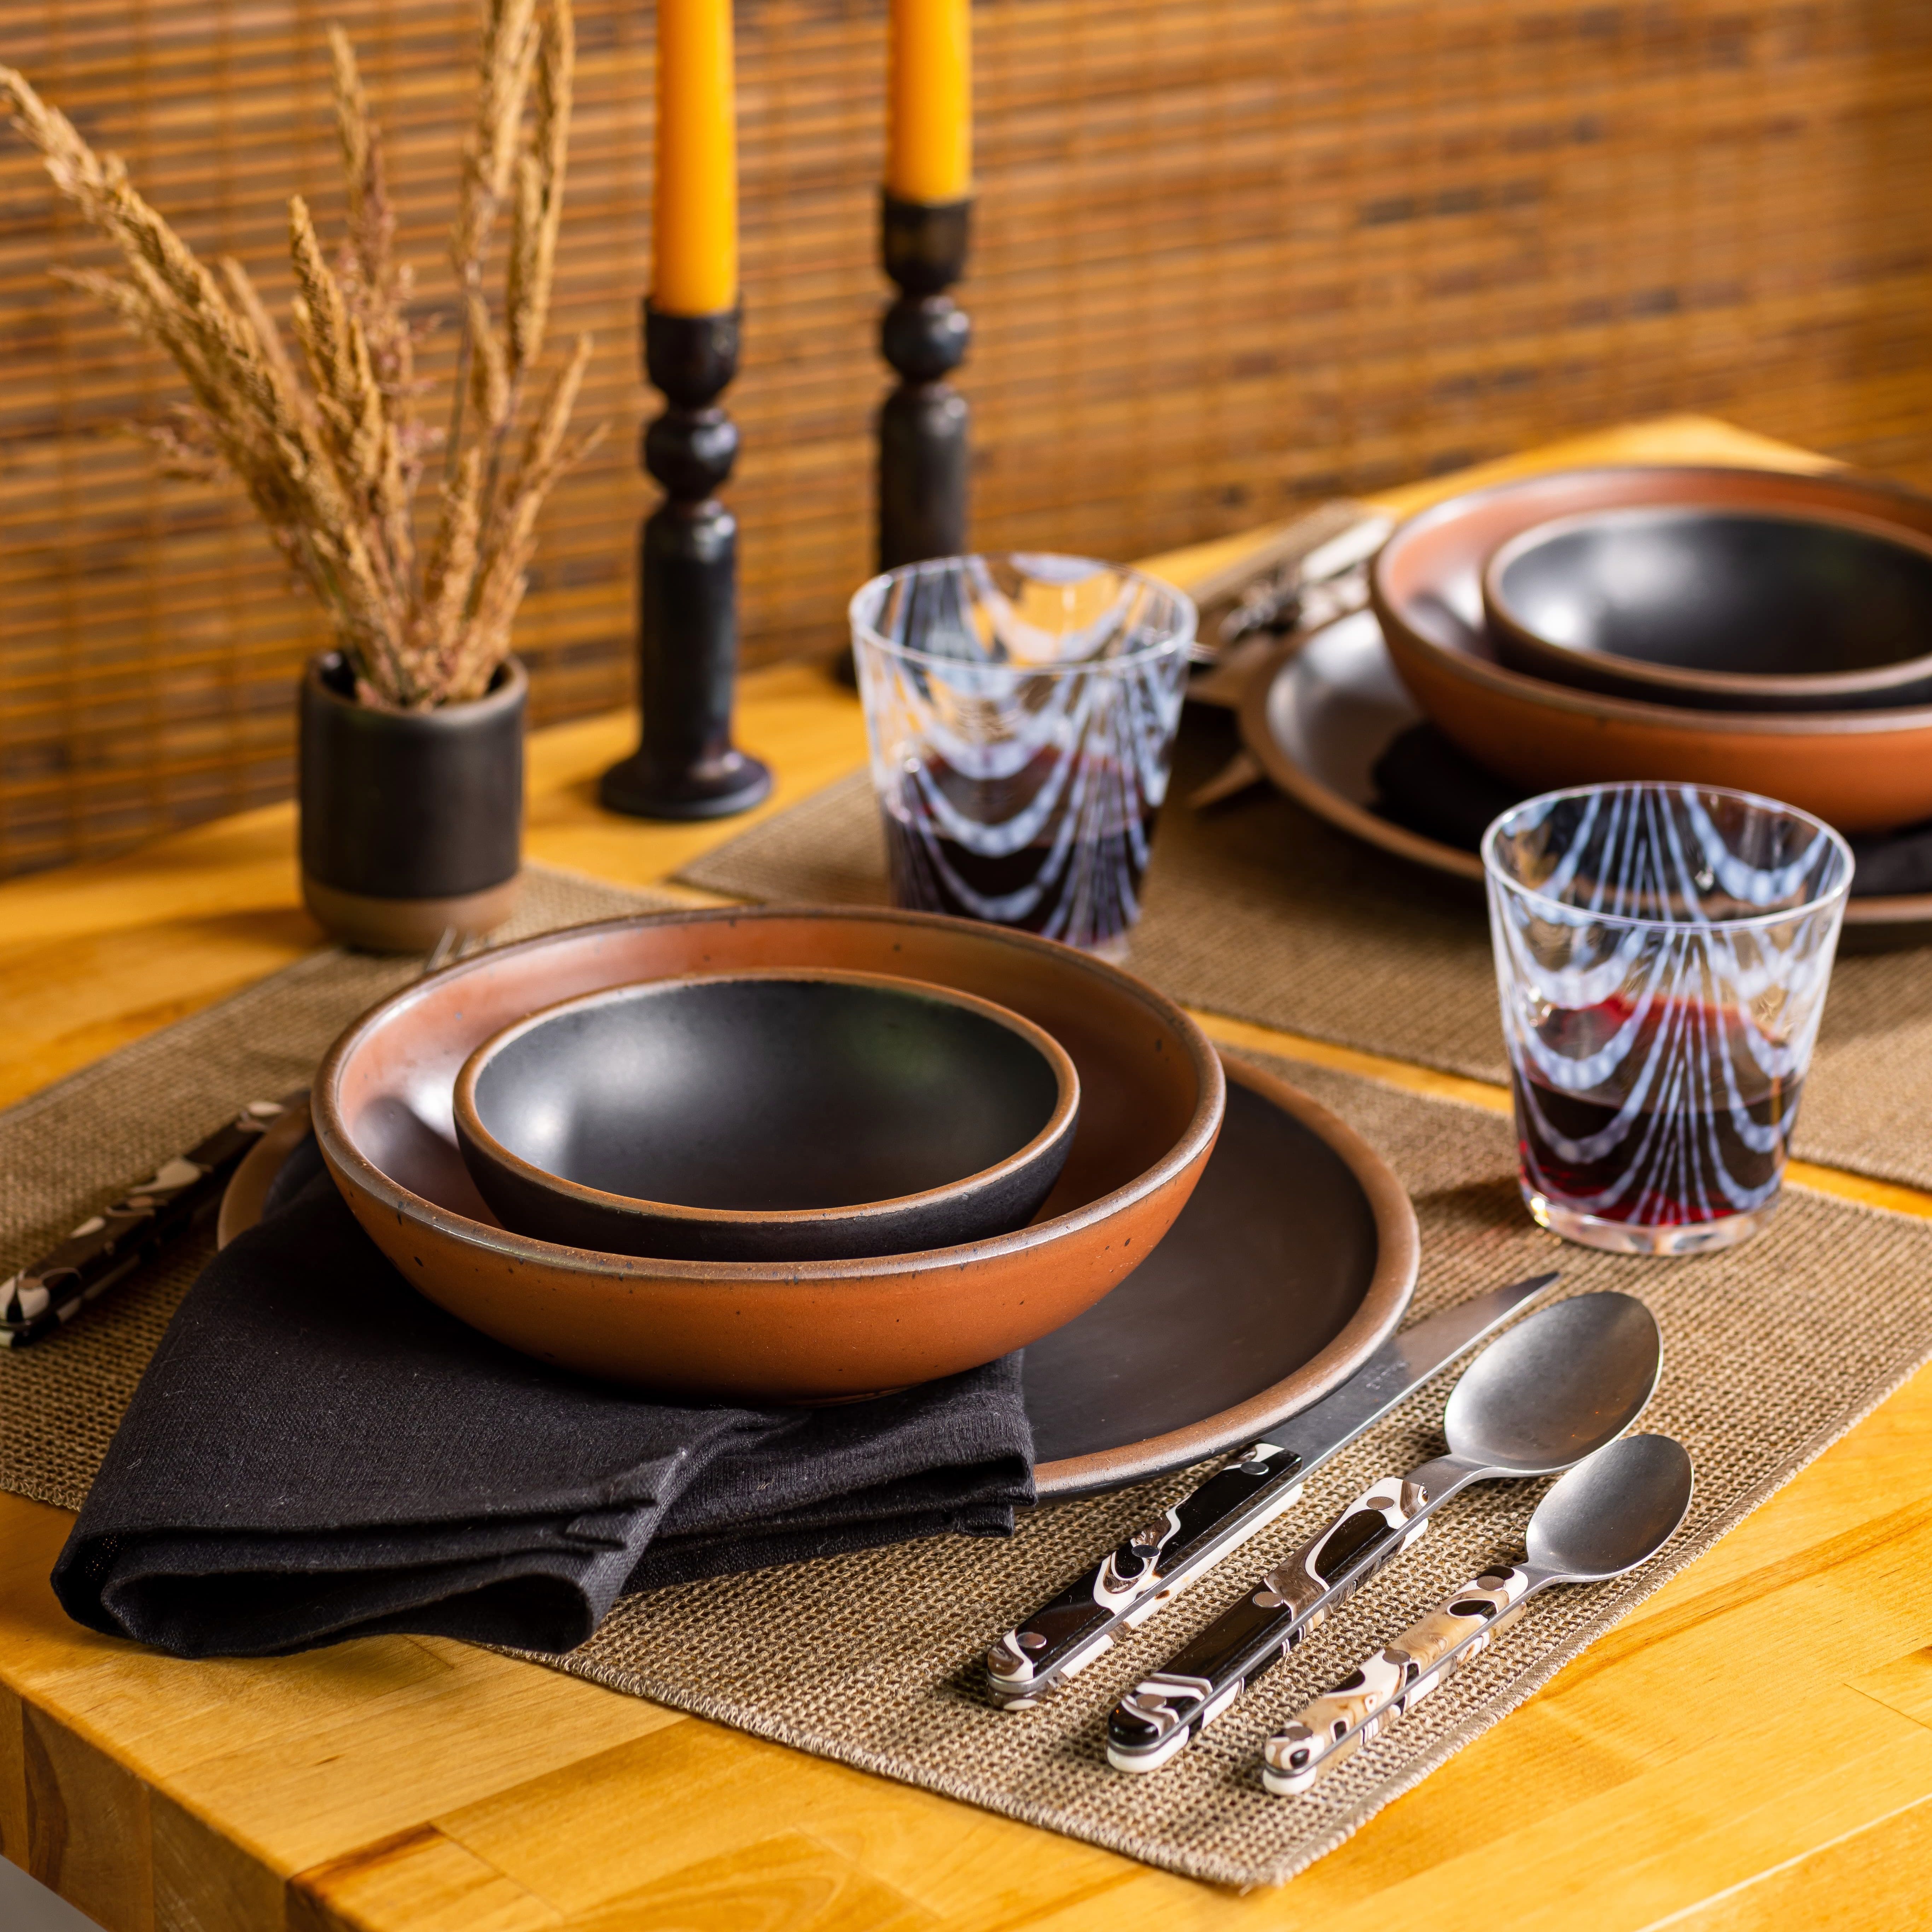 A tablescape with a large terracotta bowl stacked with a smaller black bowl inside. Also on the table are dried plants, flatware, black napkins, natural placemat, and short textured glasses.